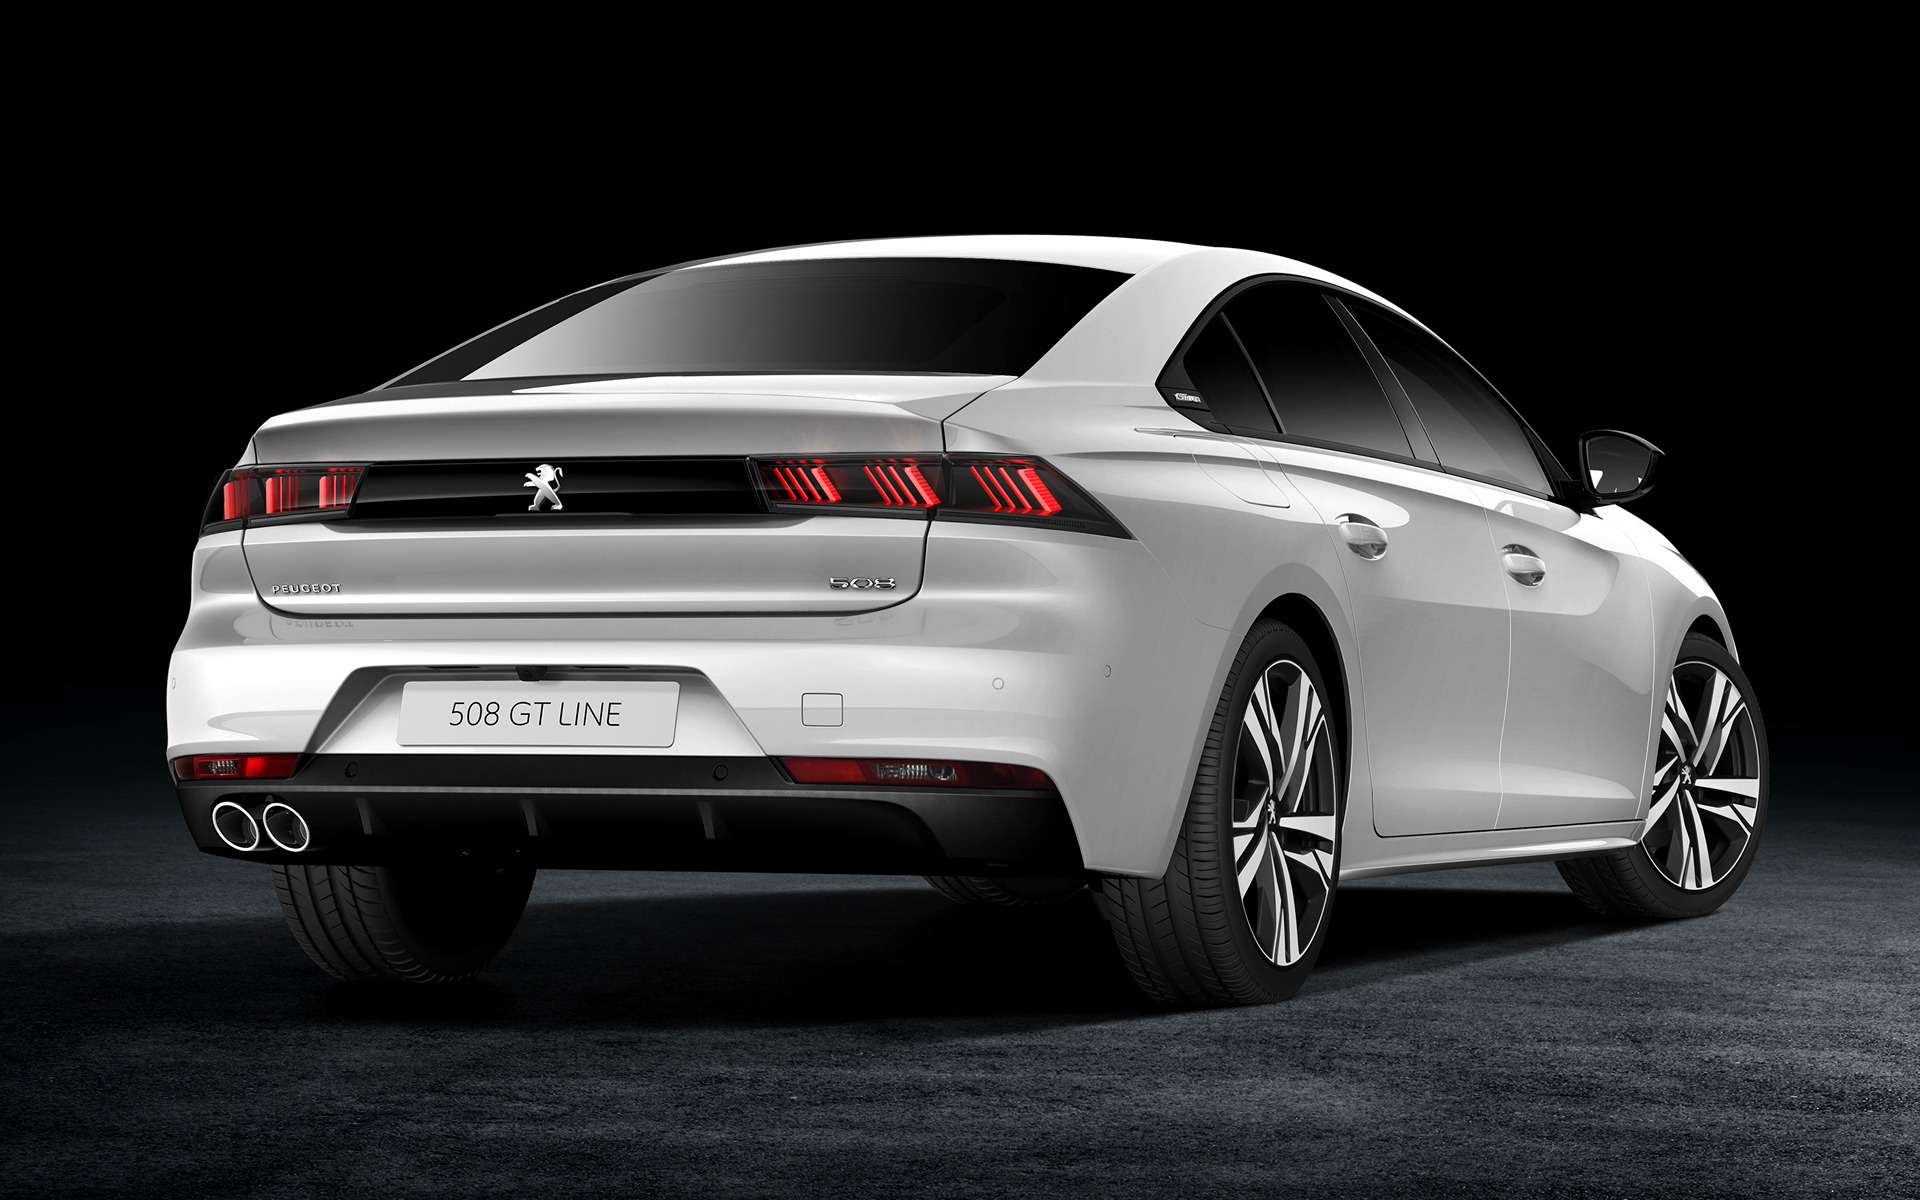 WE BET YOU DIDN’T KNOW THESE FACTS ABOUT PEUGEOT 508 GT LINE